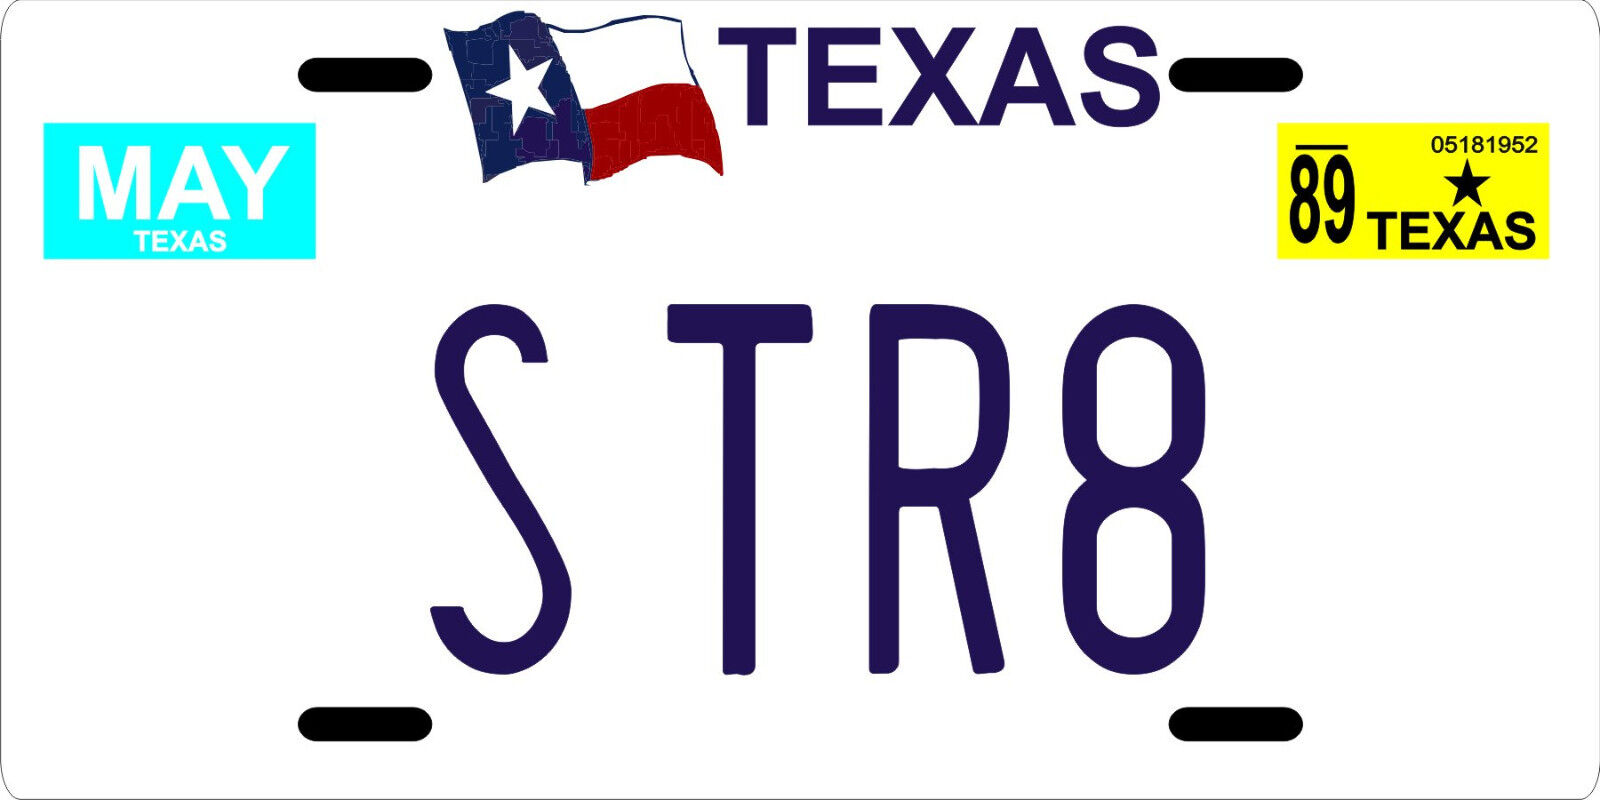 George Strait country music legend 1980's Texas License plate